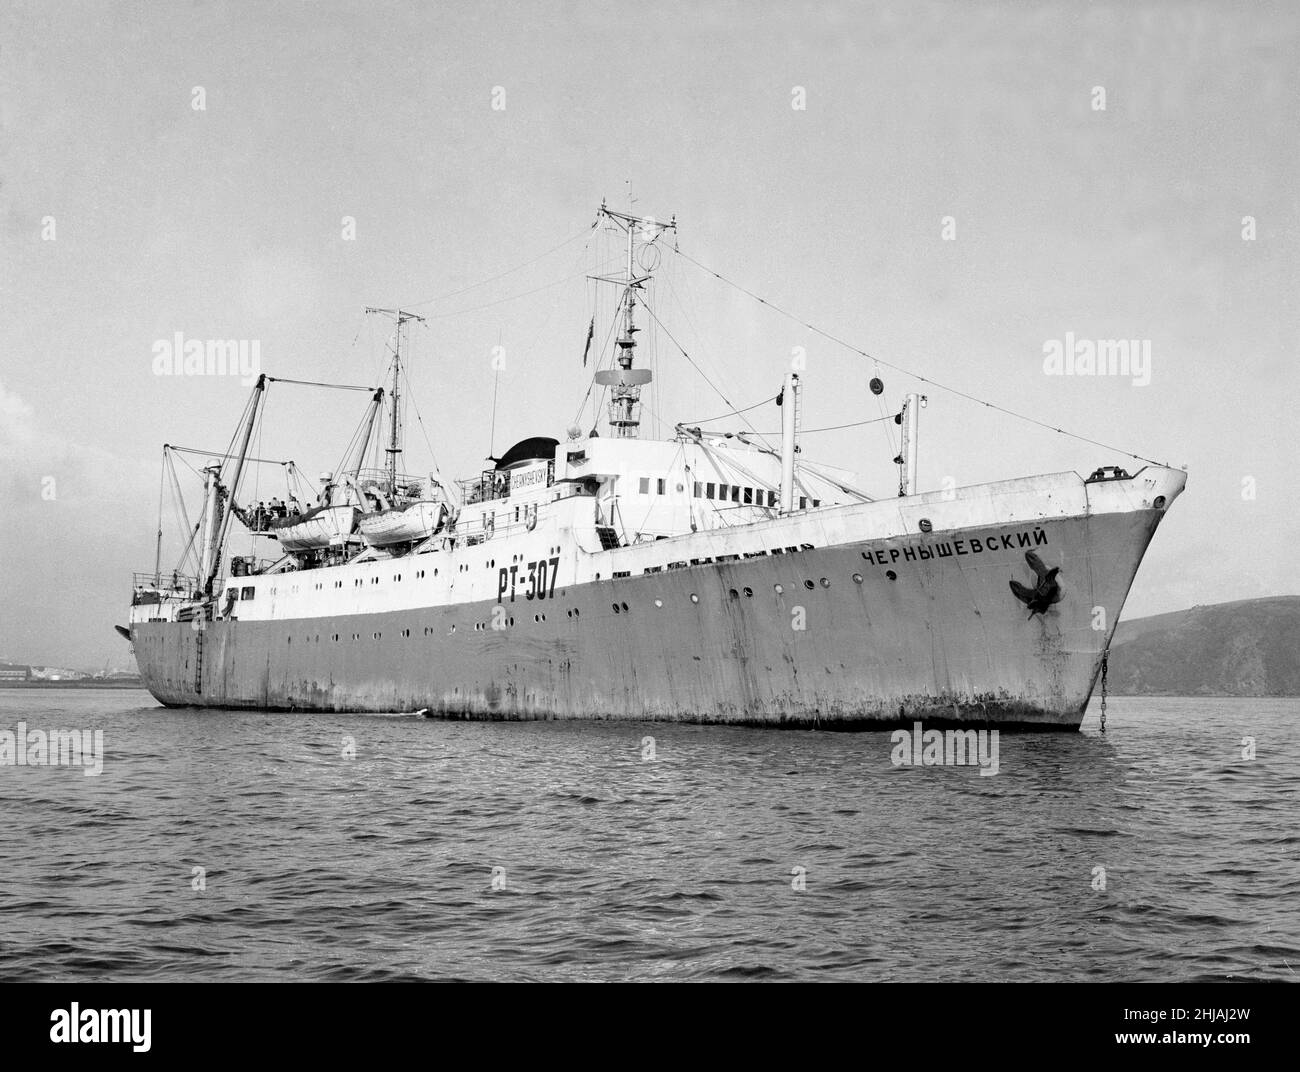 The Russian fishery ship 'Chernyshevsky' lying at anchor in Plymouth Sound after being 'arrested' by British authorities. 18th April 1963. Stock Photo